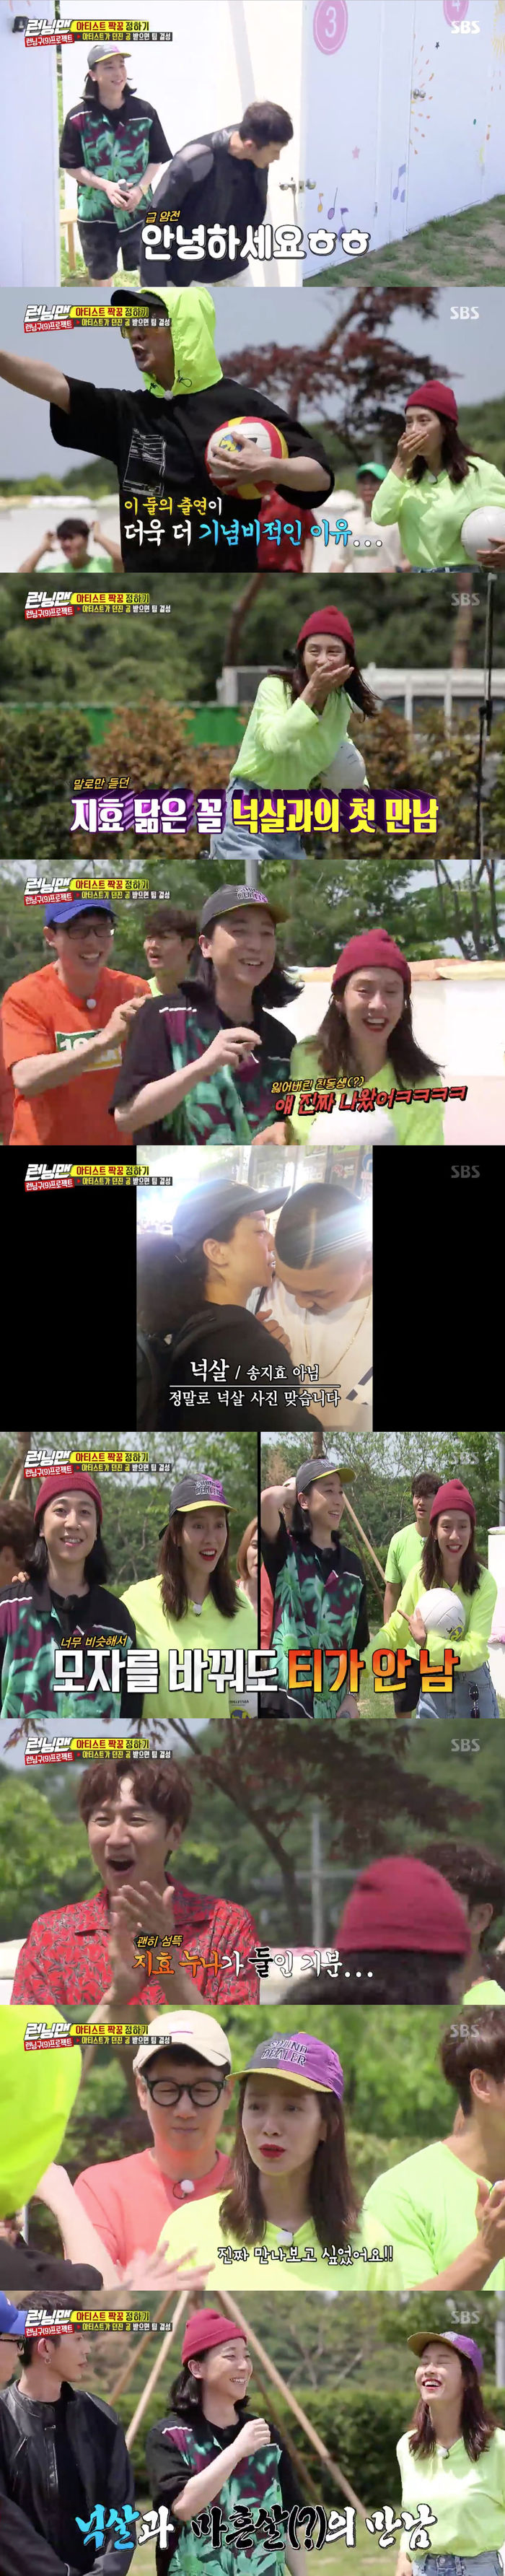 Song Ji-hyo finally met with four-year-old doppelganger.On SBS Running Man broadcasted on the 7th, a kung-kak race was held as part of the running area project.On this day, the members held a race to select The Artist to perform the collaborating stage.Before the race, the artist set up a pair, so Song Ji-hyo and Haha became pairs with the ball handed by The Artist No. 2.And the identity of Number 2 The Artist has been revealed.If you hit it as a restaurant, you should get a solution from Mr. Baek Jong-won.The main character who heard the criticism of I have to come to the alley restaurant is Baro hip-hop producer Kodkunst and rapper.Song Ji-hyo was most pleased with their appearance, as he first met with a four-year-old known for his resemblance to Baro himself.Song Ji-hyo was pleased to meet his brother, saying, Hes really out. The members were surprised that they were really similar.Four-year-old and Song Ji-hyo stood side by side, hats swapped and looked at them, admiring them, saying, Its natural, maybe youve changed your hat.Song Ji-hyo asked the four-year-old, I really wanted to meet you, do we really look that much like you?Yoo Jae-Suk laughed, saying, I finally met you at the age of four and forty, it is really good.